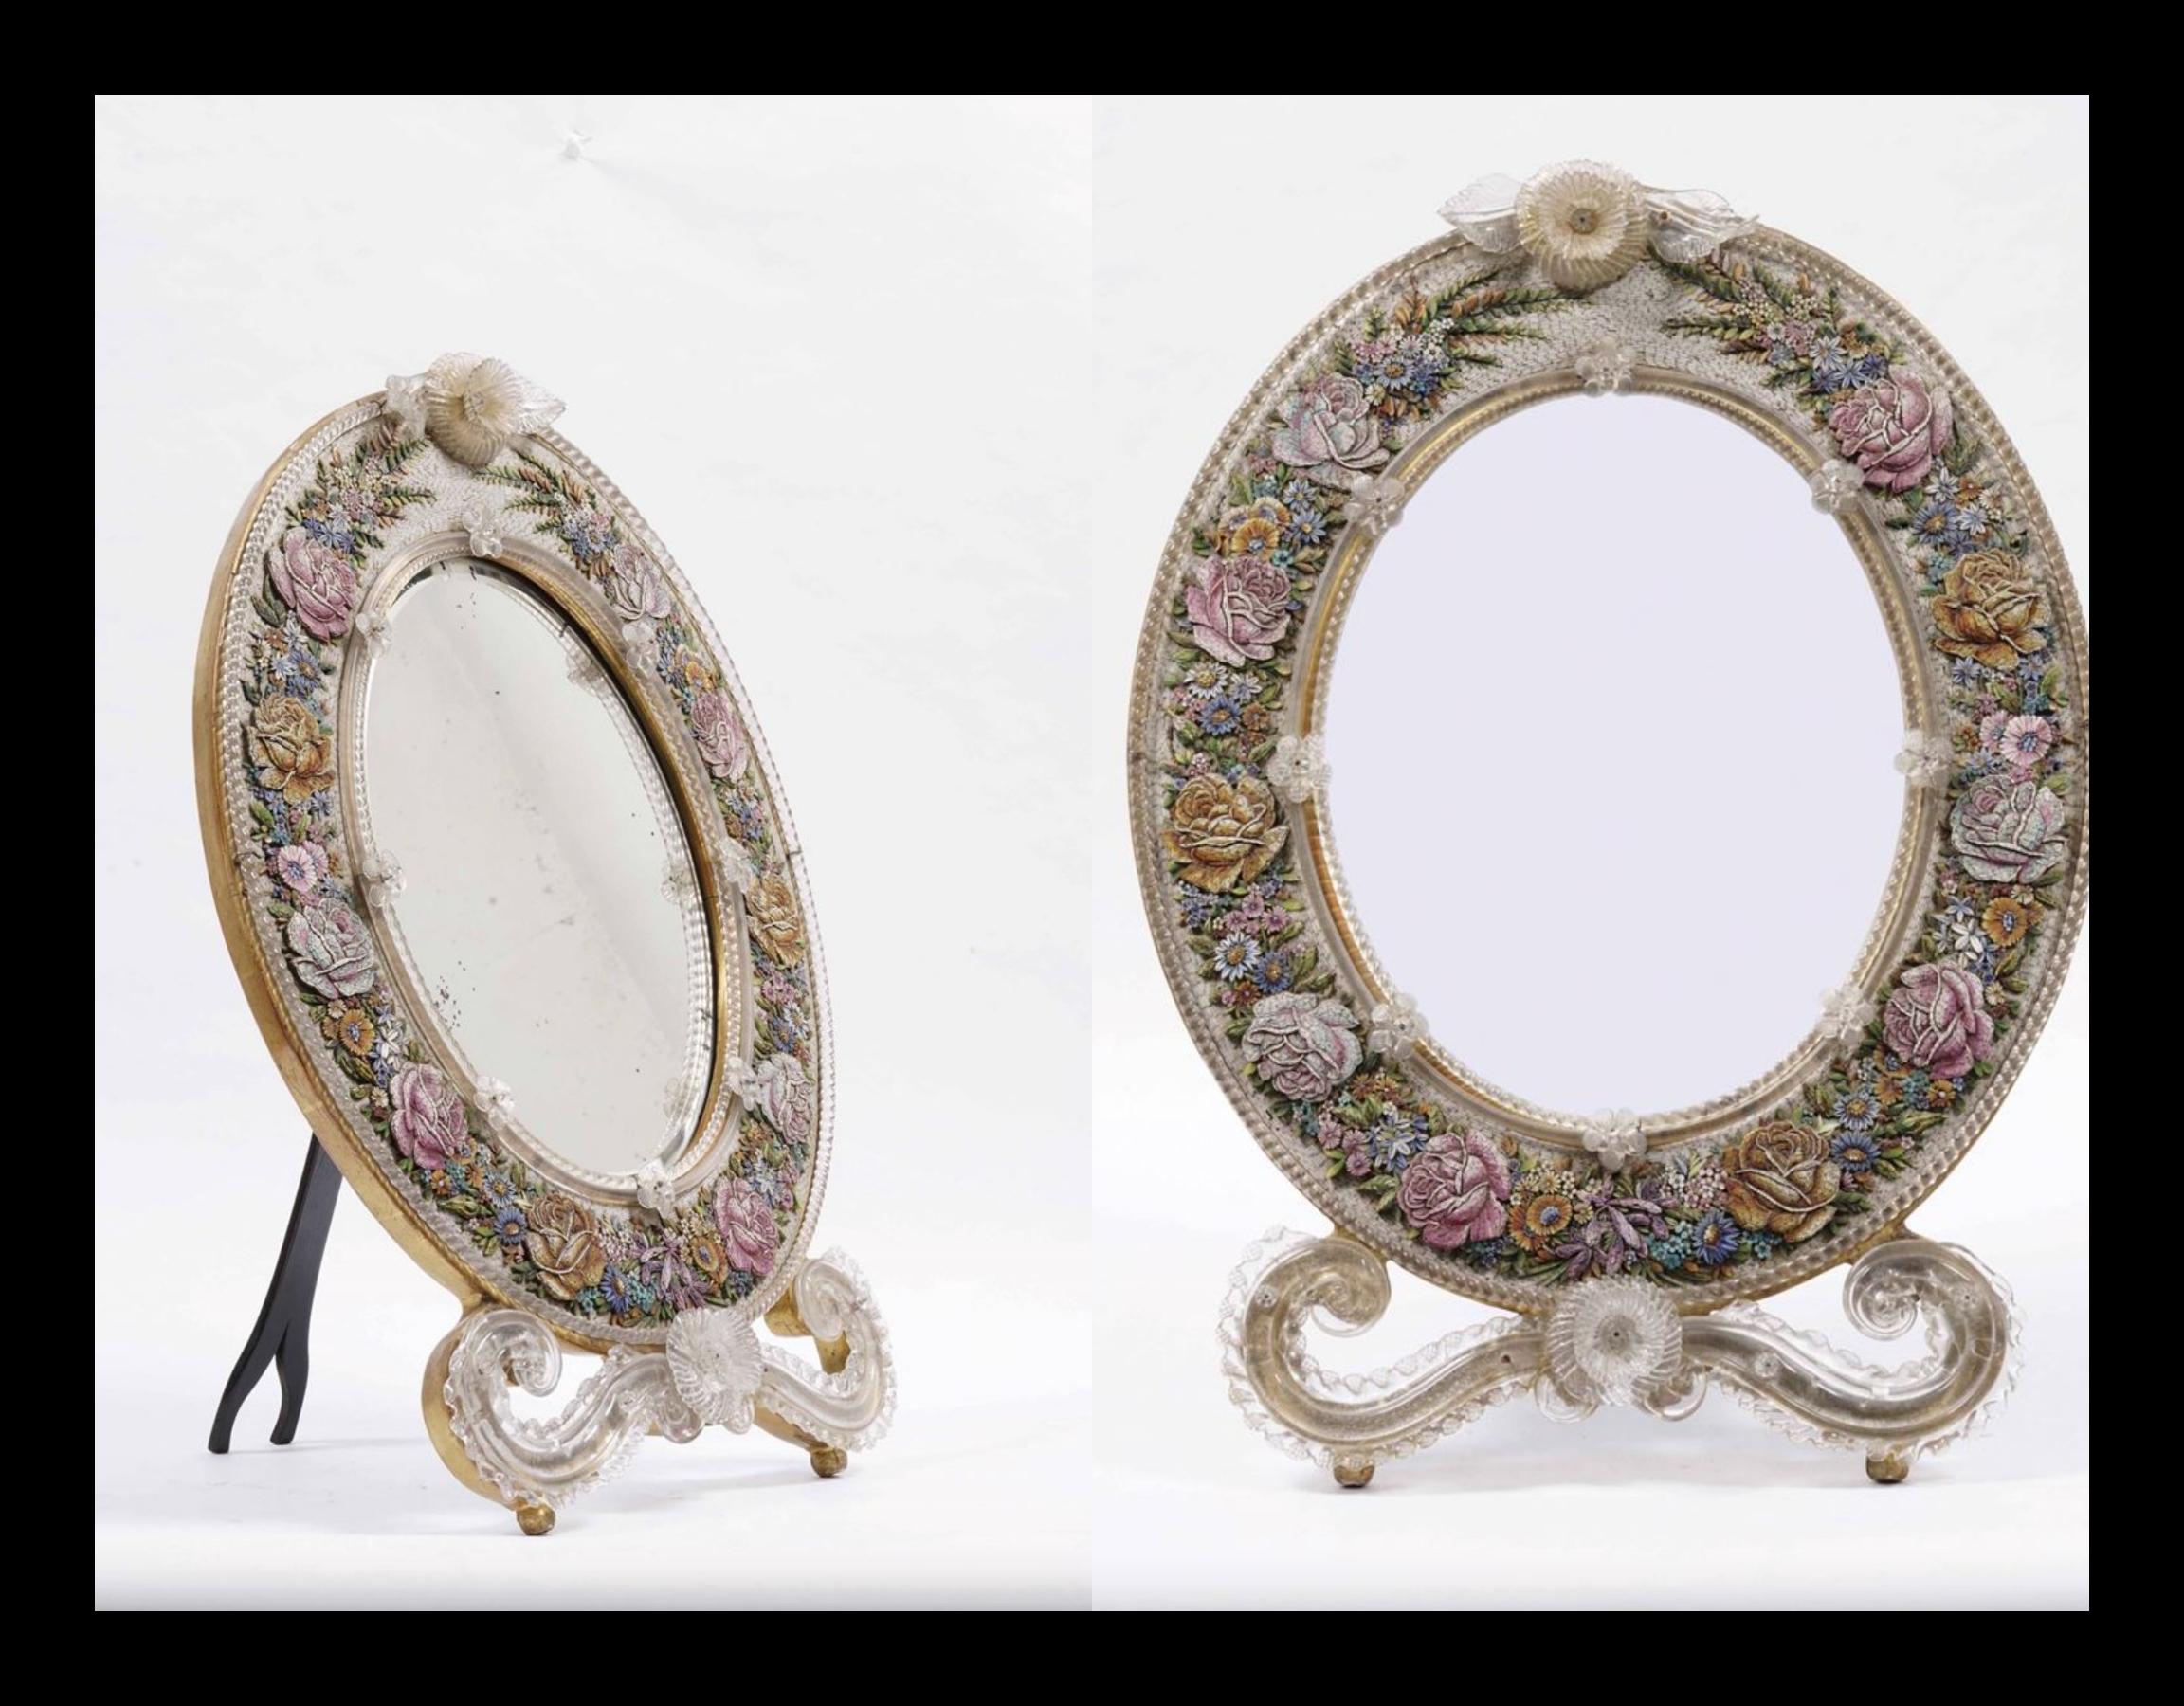 Modern Oval Venetian Mirror with Floral Micromosaic Frame.  20th century